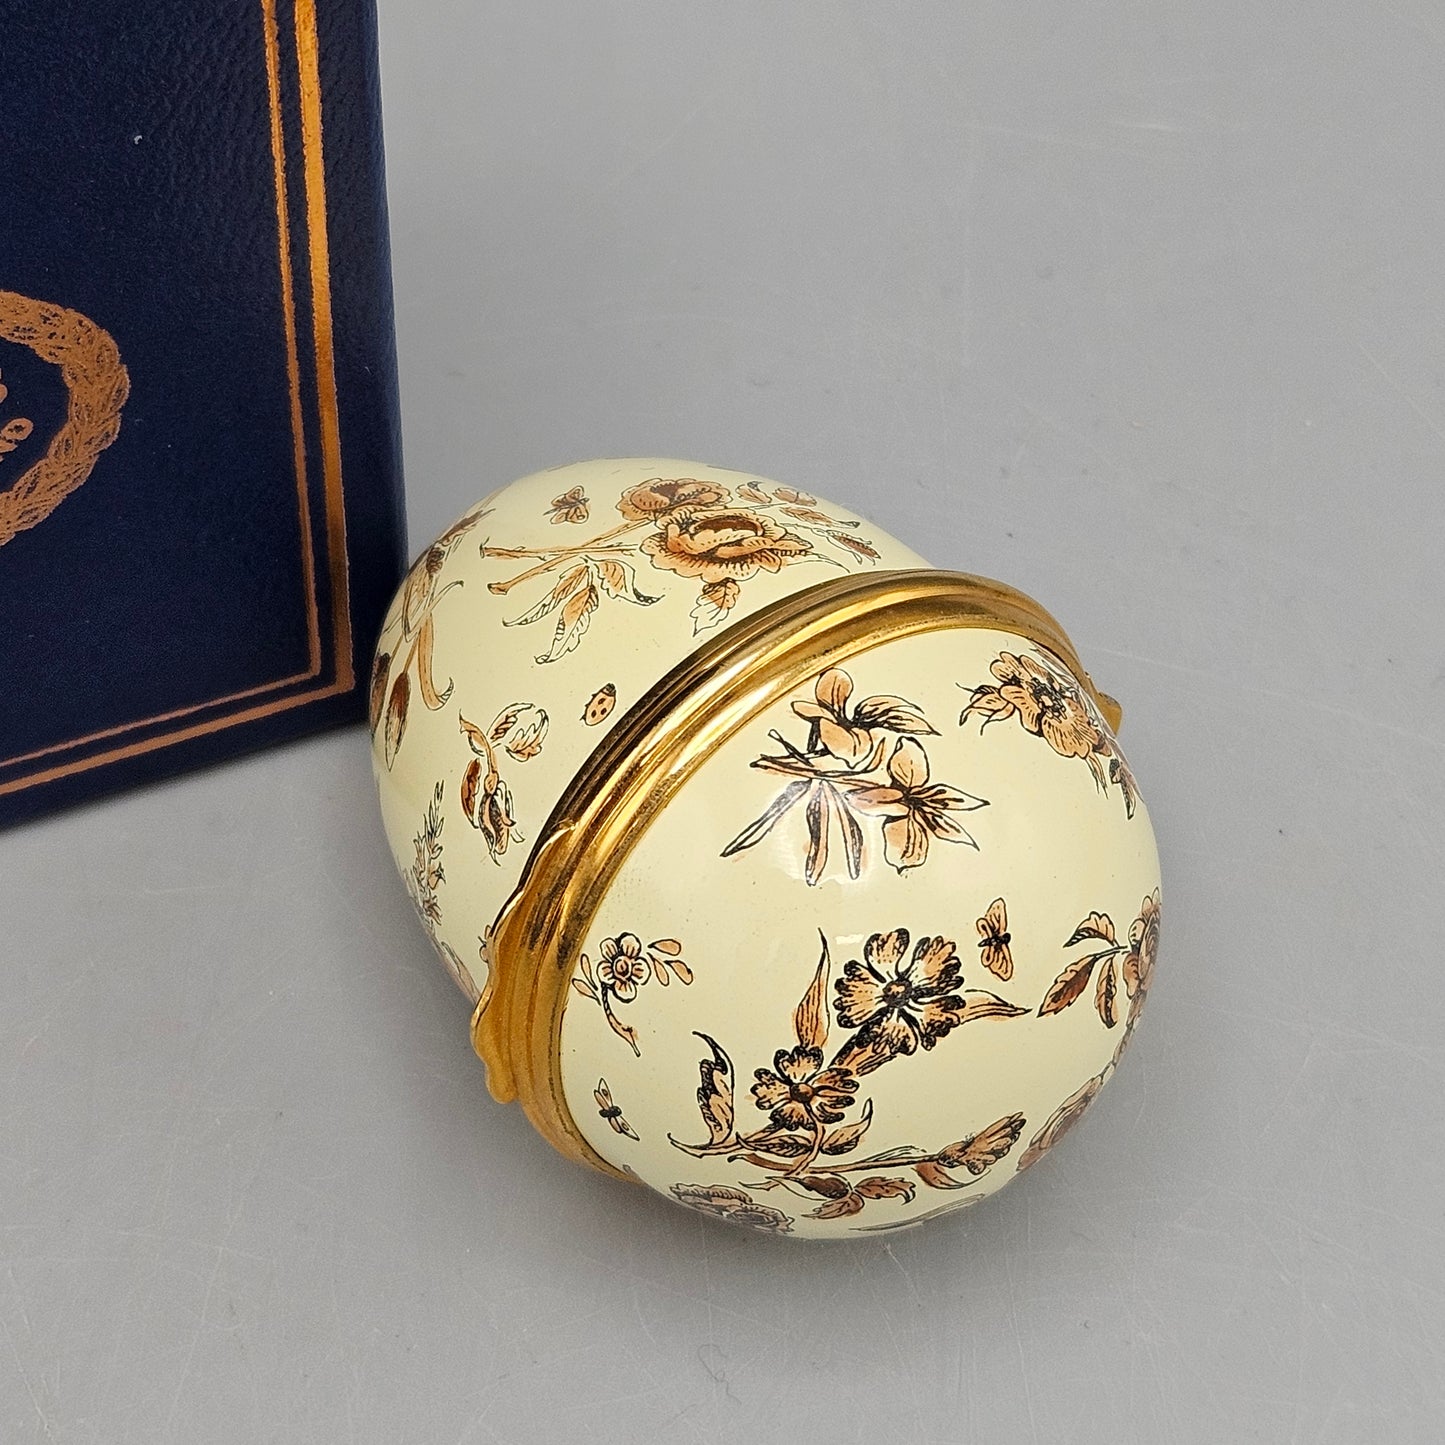 Vintage Halcyon Days Egg Shaped Trinket Box with Flowers